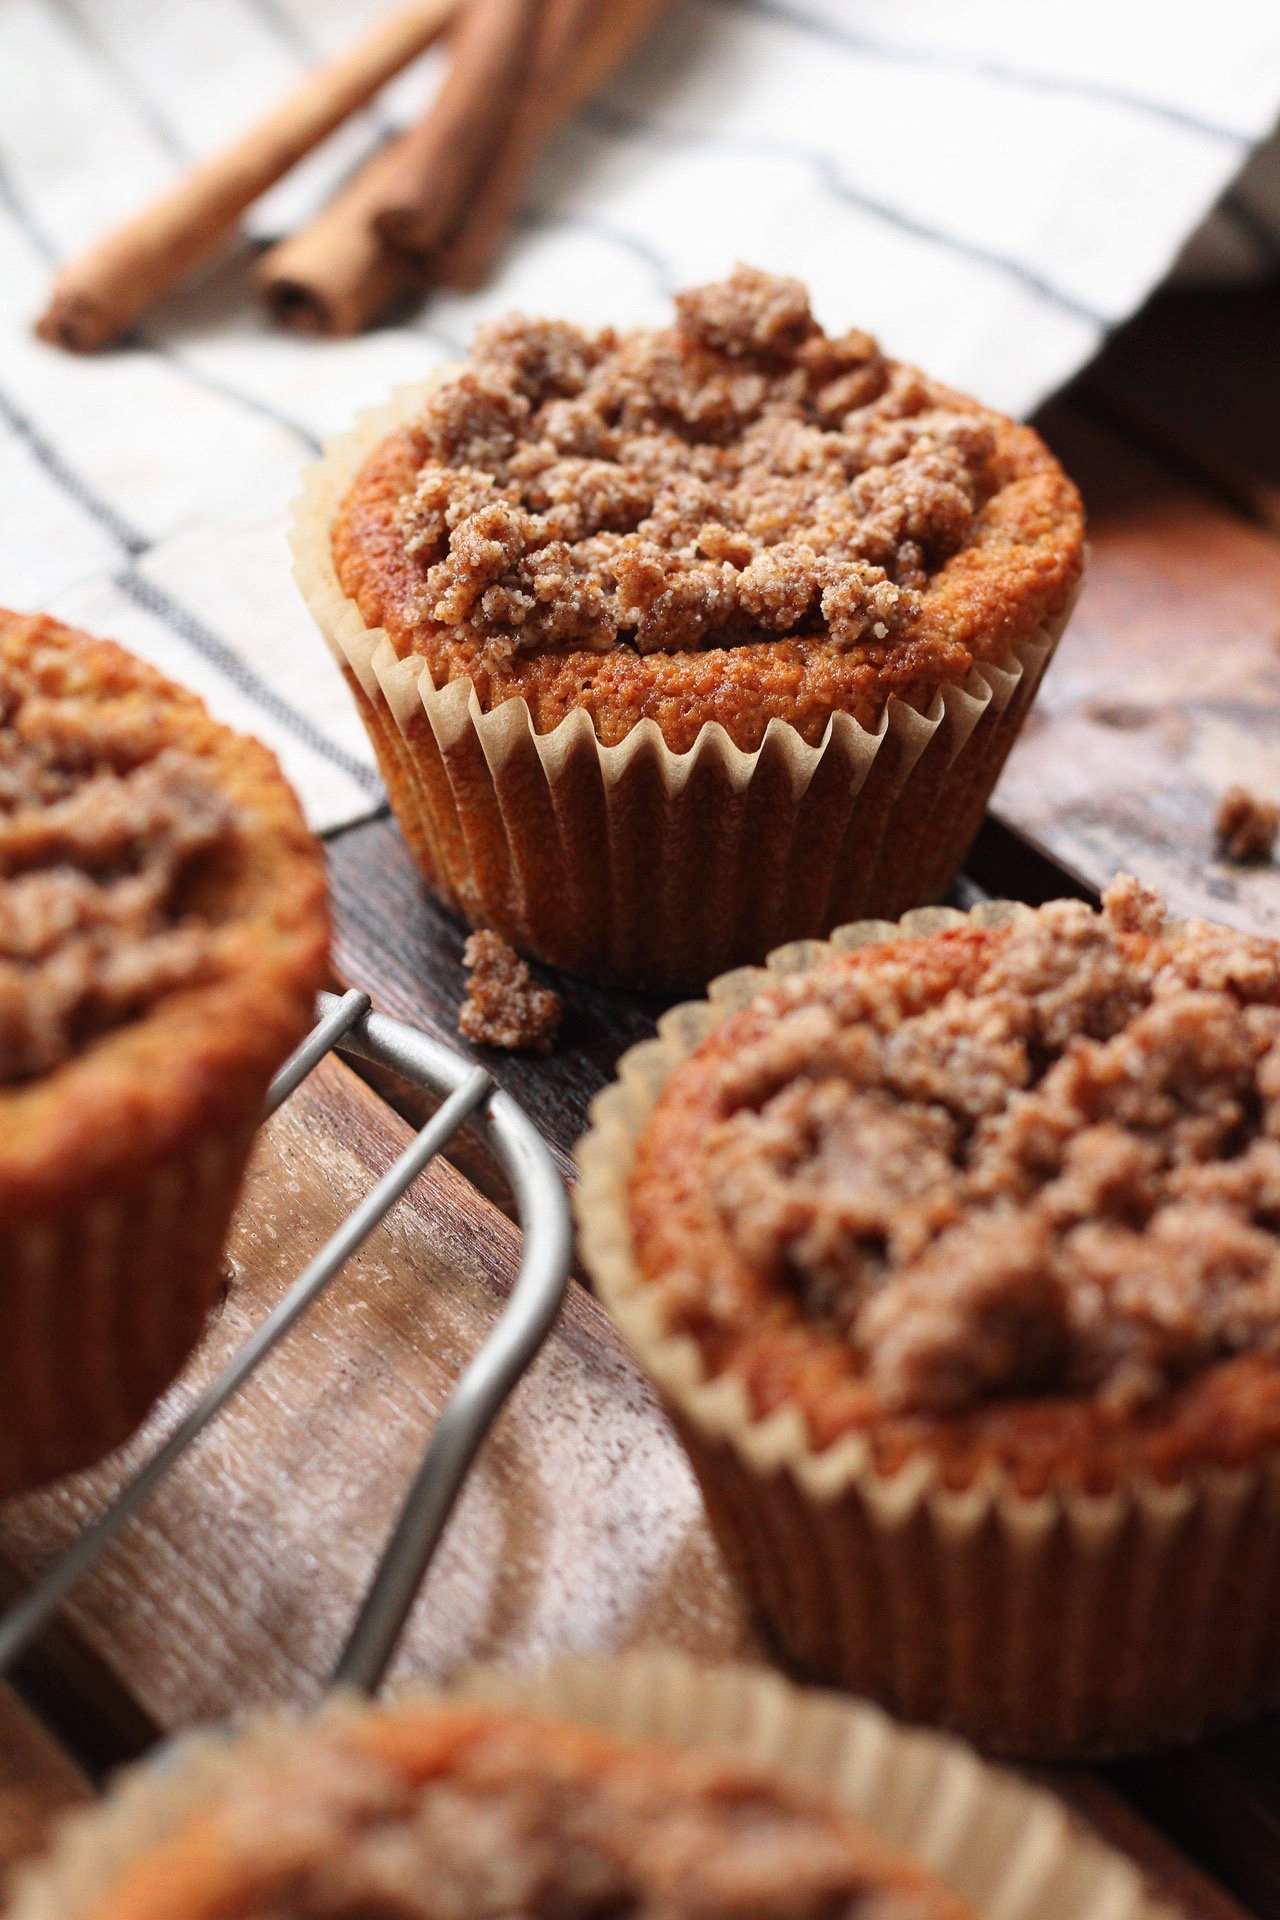 These grain free Paleo Cinnamon Muffins are a 25 minute, delicious, family friendly recipe. This easy paleo cinnamon muffin recipe makes it easy to make healthier choices, because they're so dang good! #grainfreecinnamonmuffins #paleomuffins #paleocinnamonmuffins #grainfreemuffins #paleomuffinrecipes